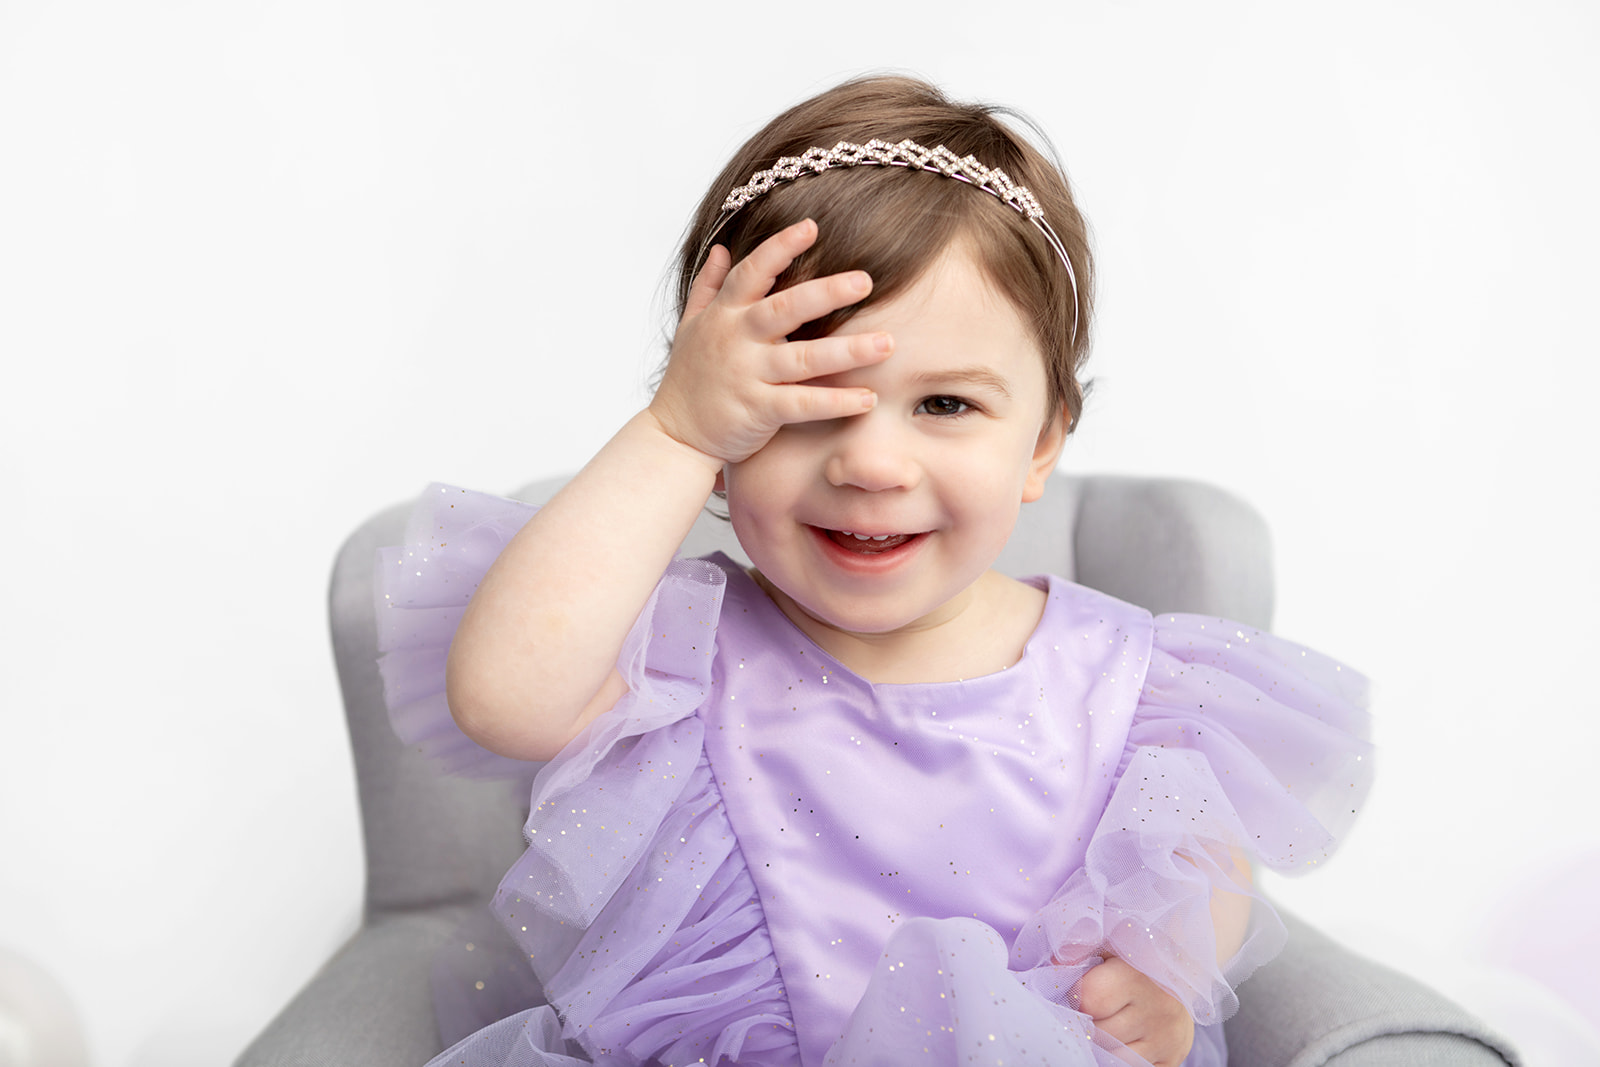 Two year-old Blake plays peekaboo with her photographer, Karen Kahn. Blake wears a bedazzled yet delicate headband, and a satin lavender party dress with tulle sleeves. Gold glitter sparkles in the foreground of Blake's two year portrait.